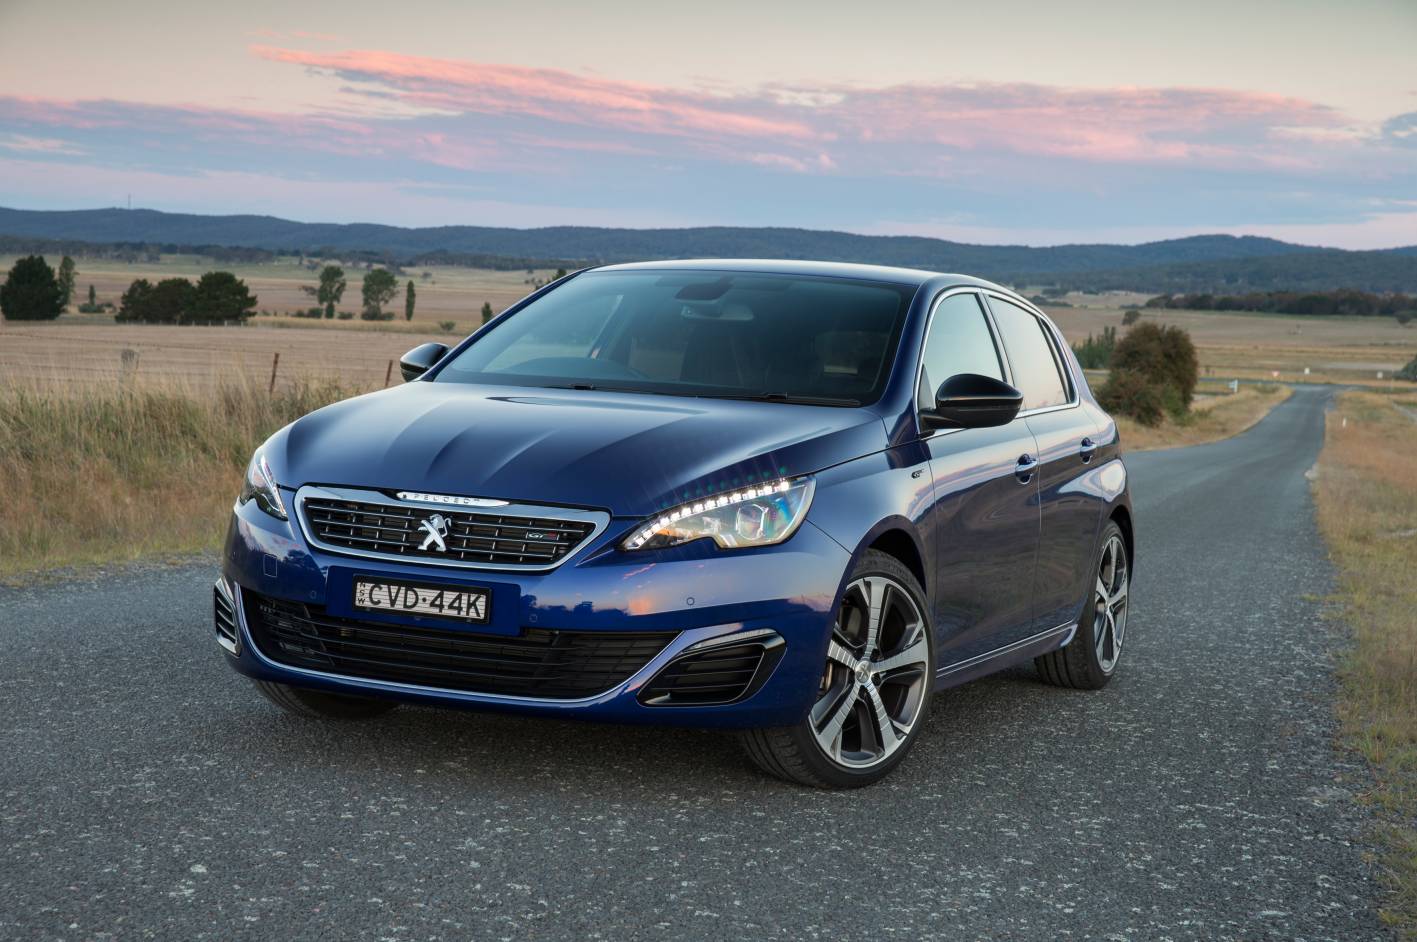 Review 15 Peugeot 308 Gt Review And Road Test